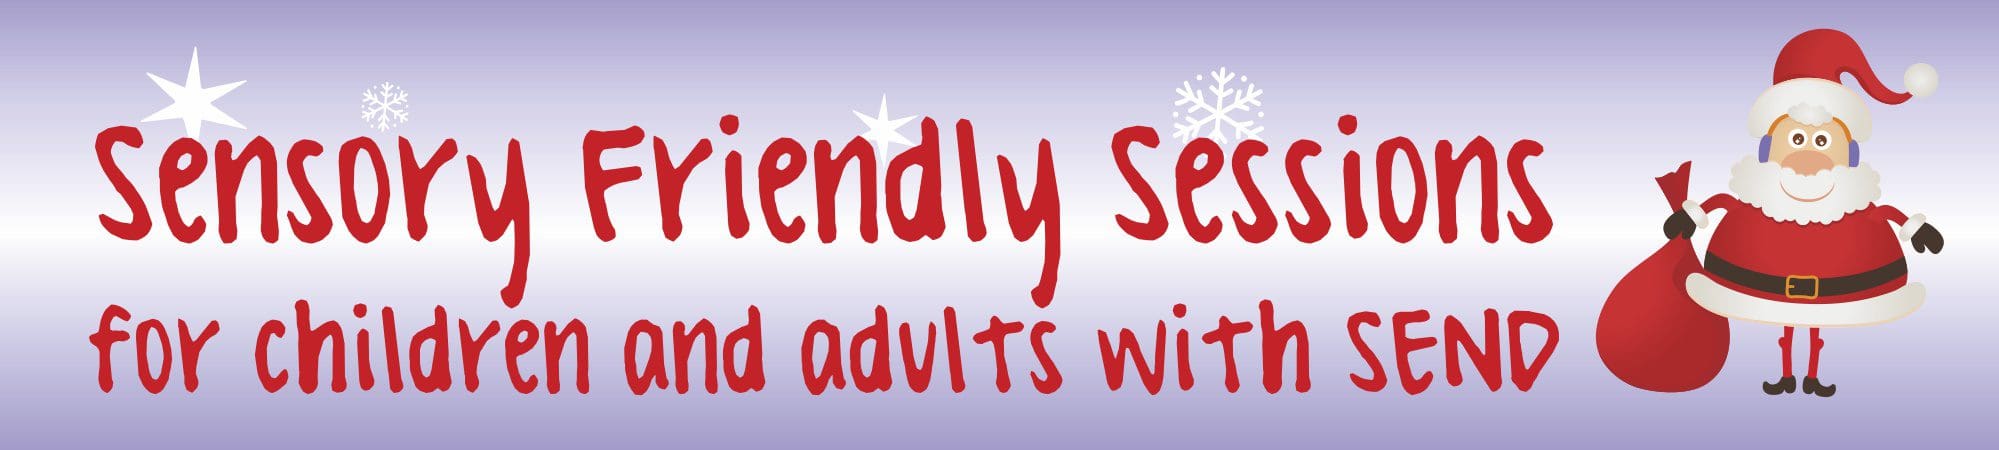 Sensory Friendly Sessions for childern and adults with send 